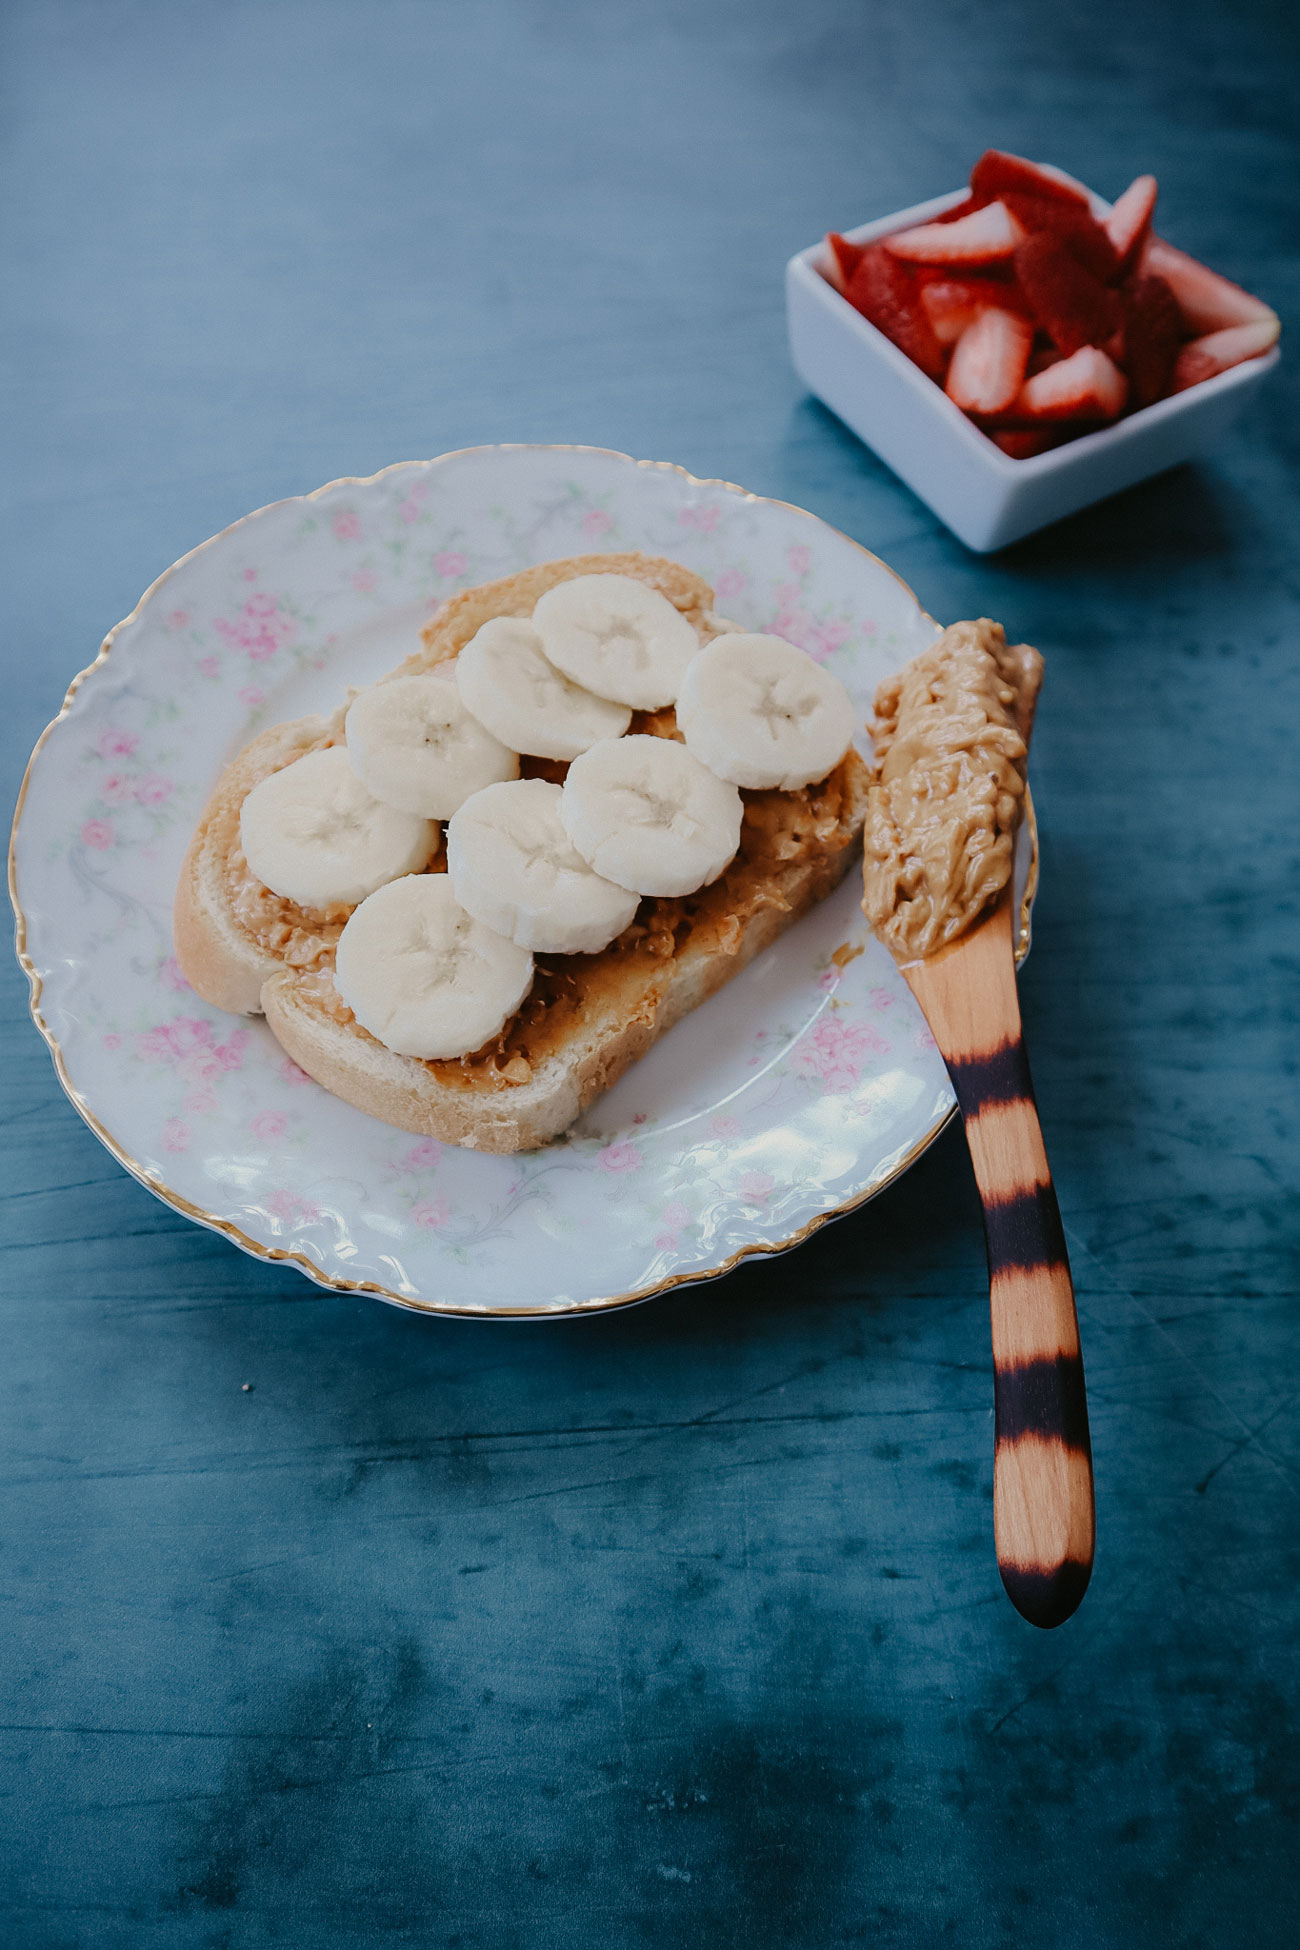 A wooden knife being used to spread peanut butter.